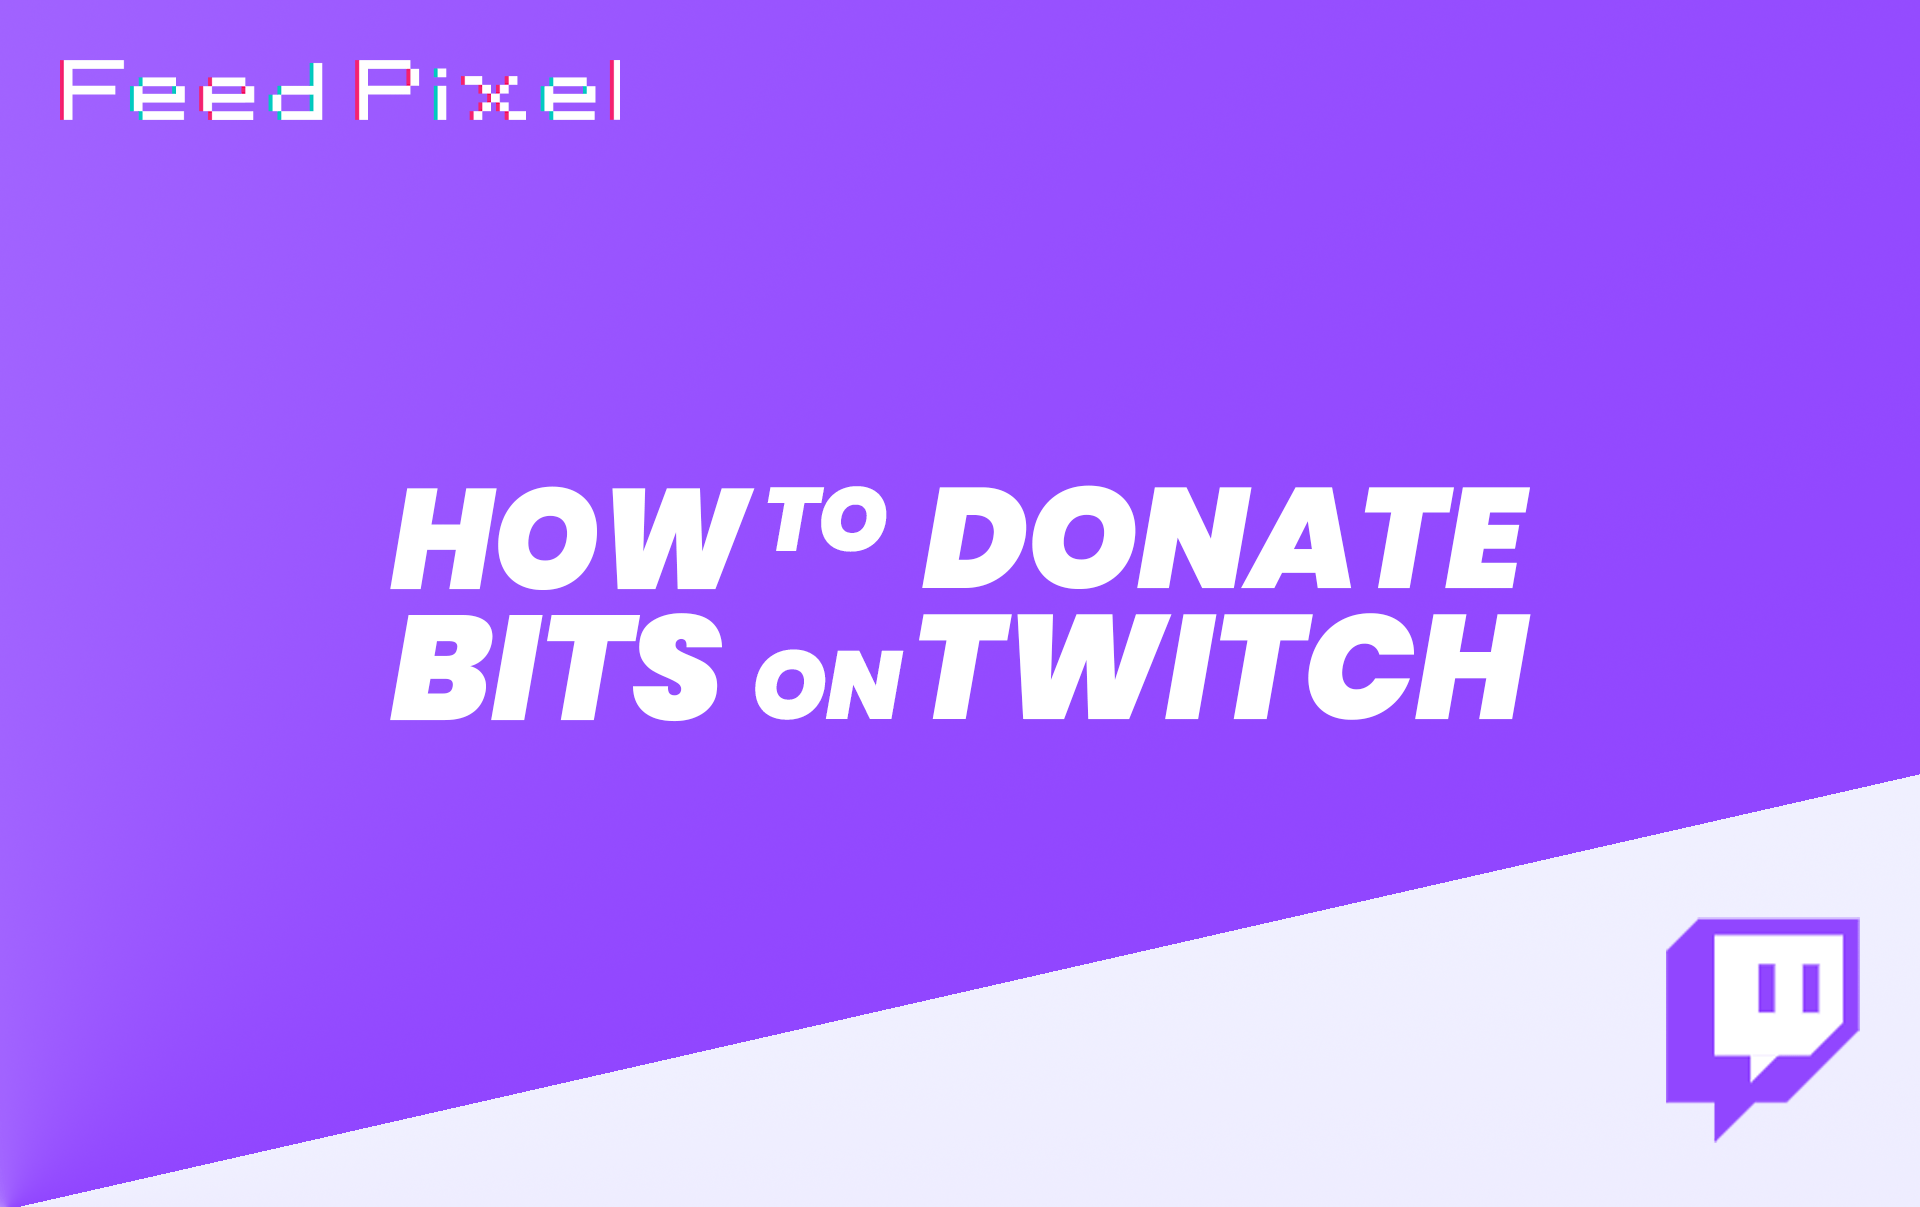 How To Donate Bits On Twitch?